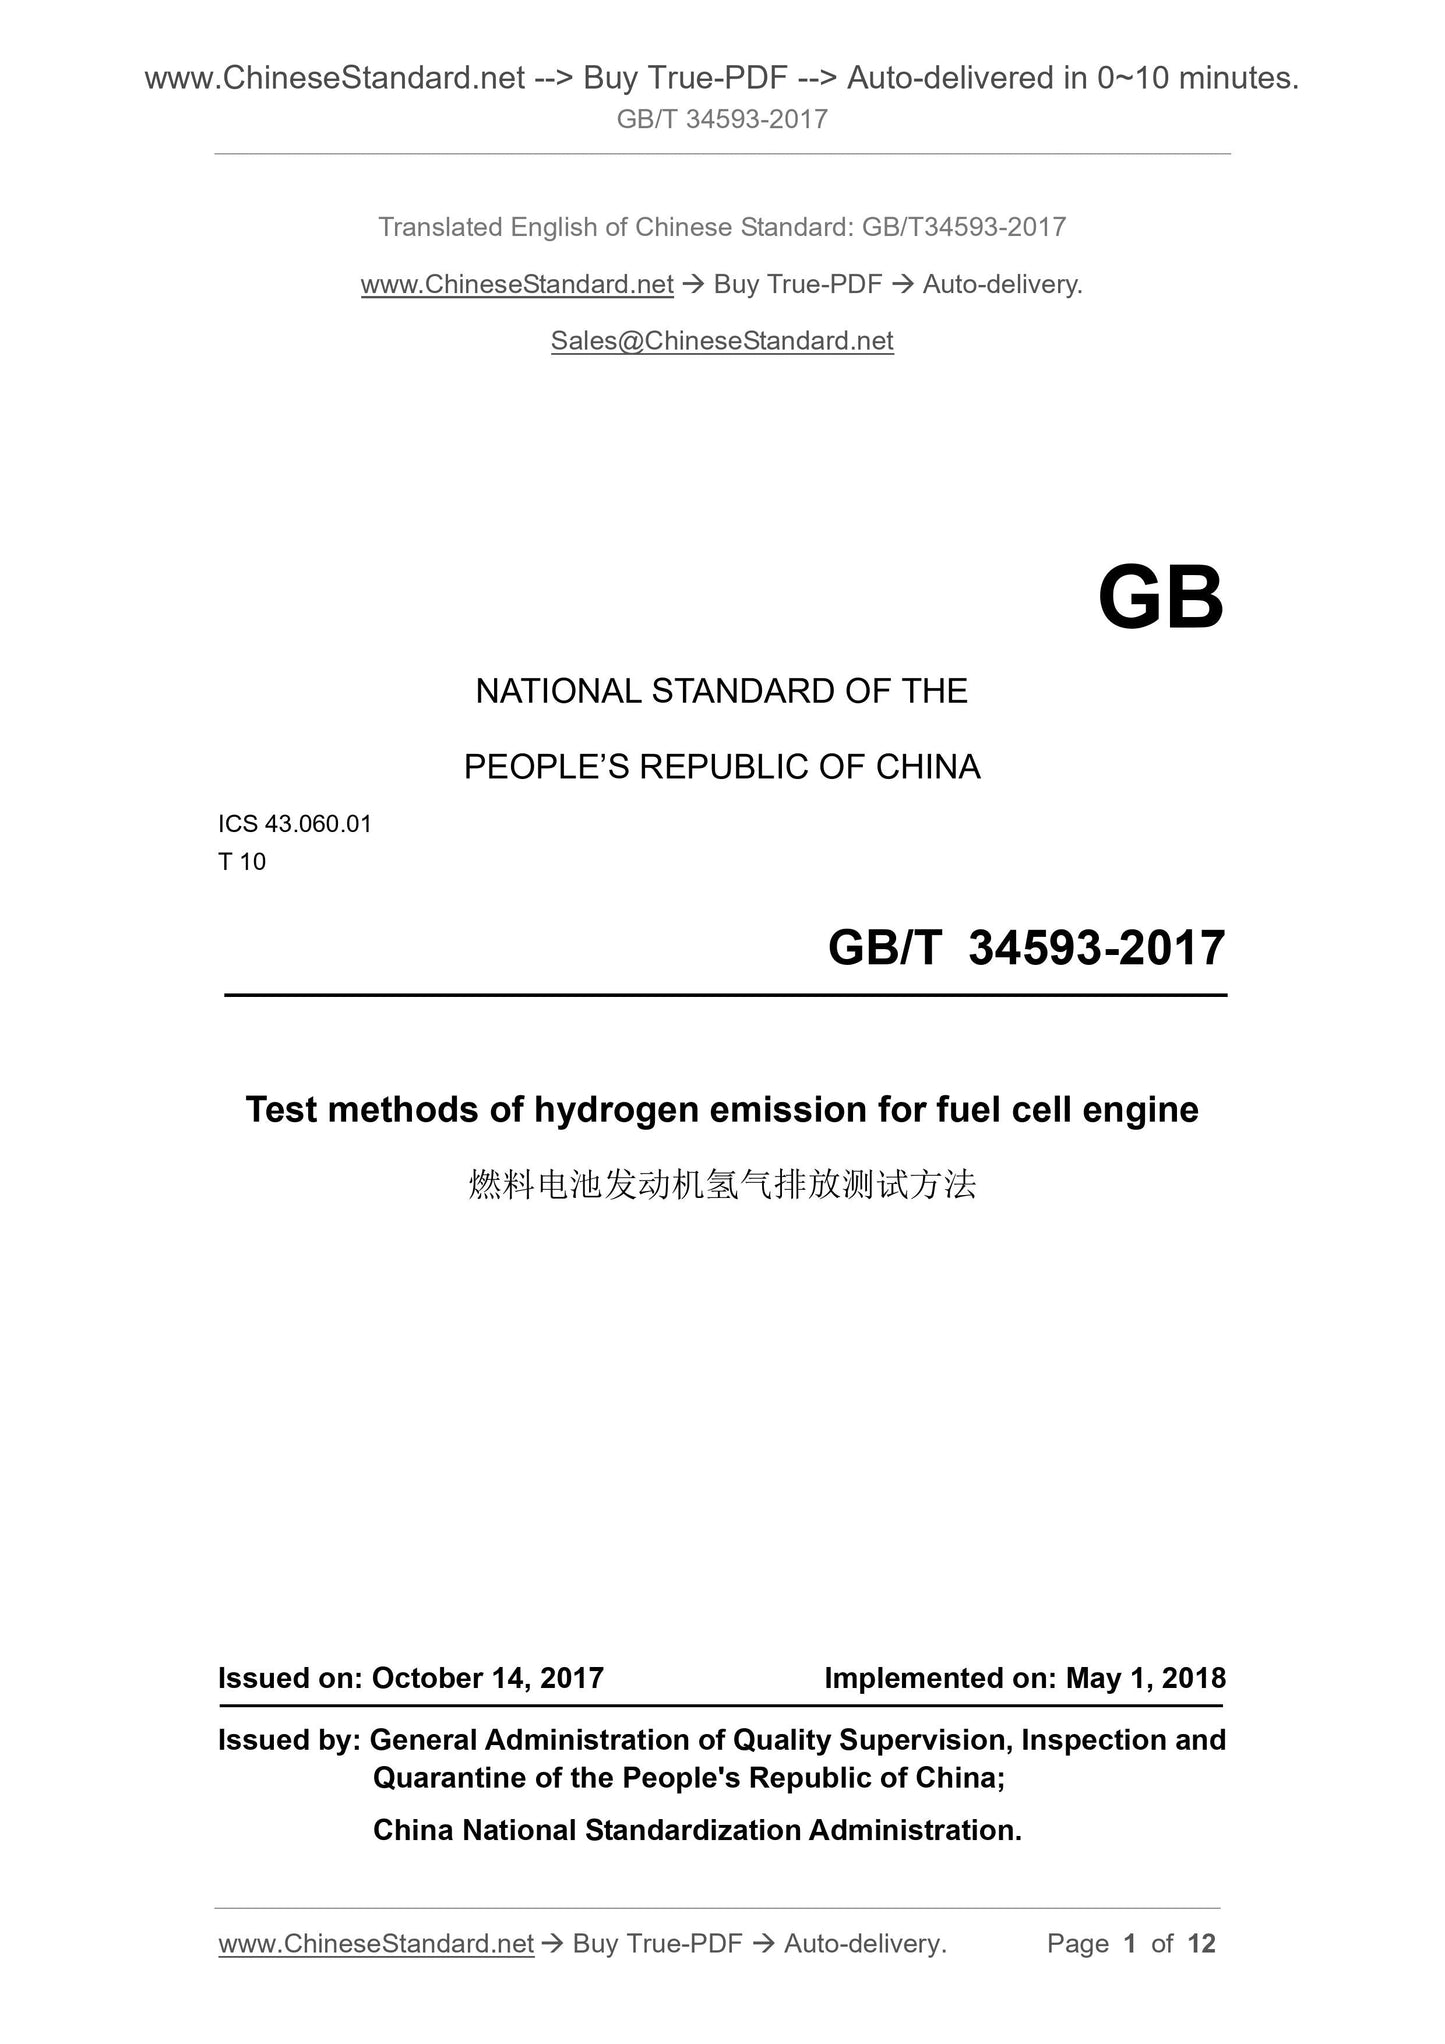 GB/T 34593-2017 Page 1